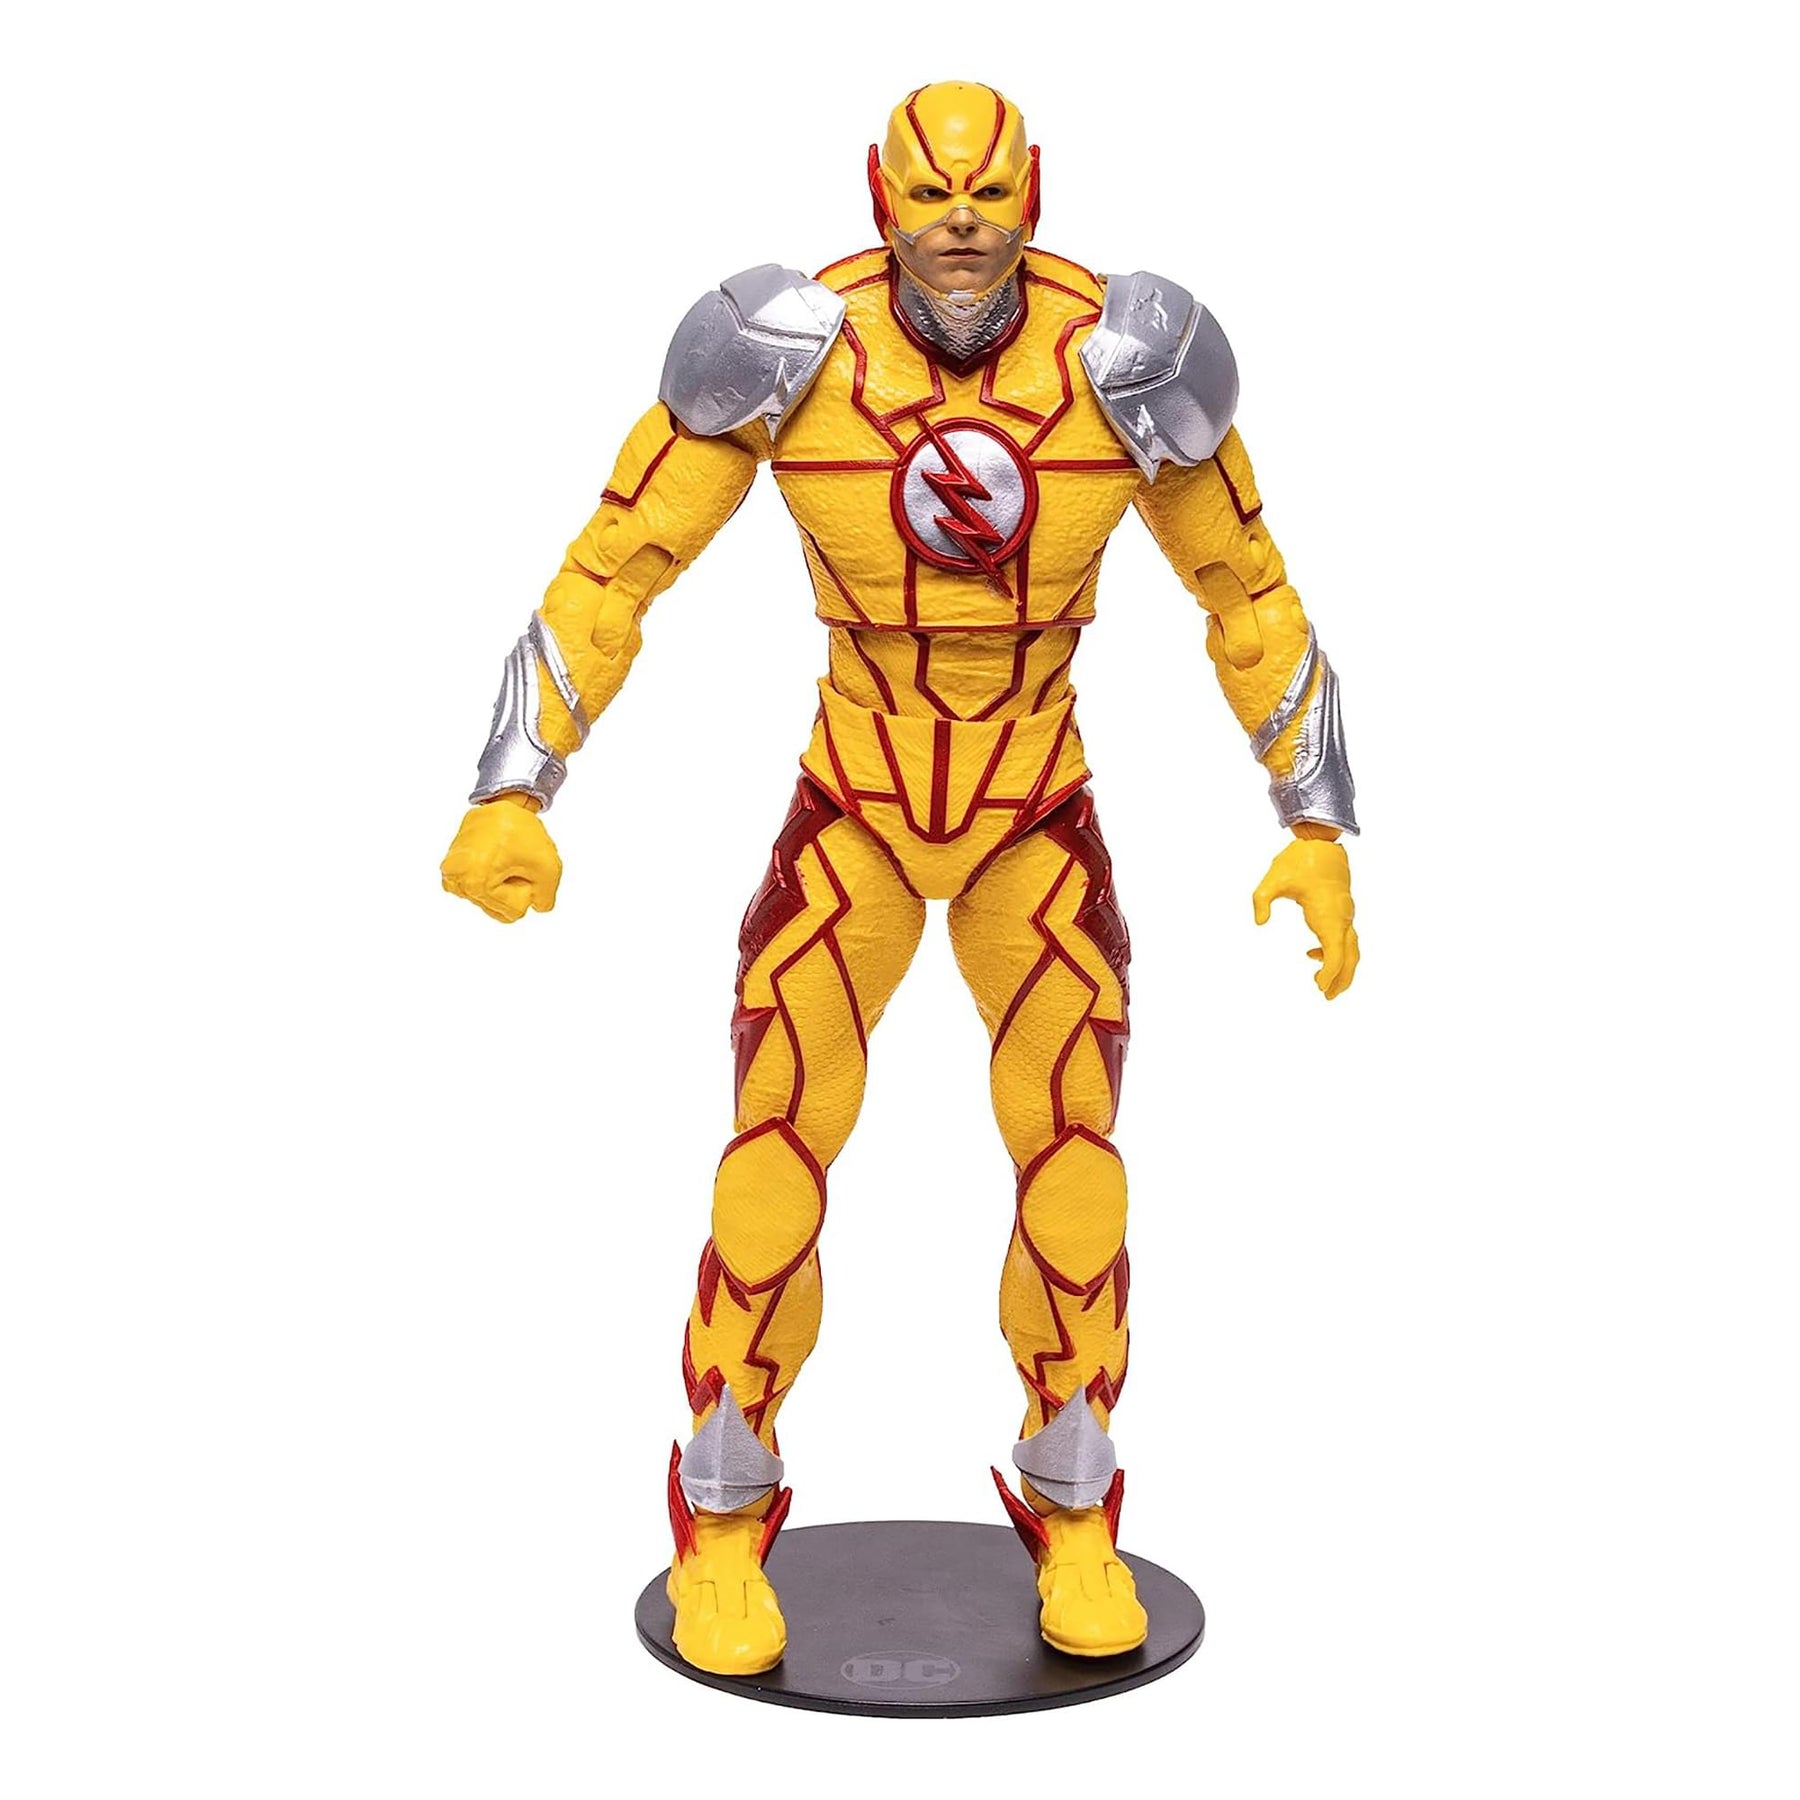 DC Multiverse 7 Inch Action Figure | Injustice 2 Reverse Flash